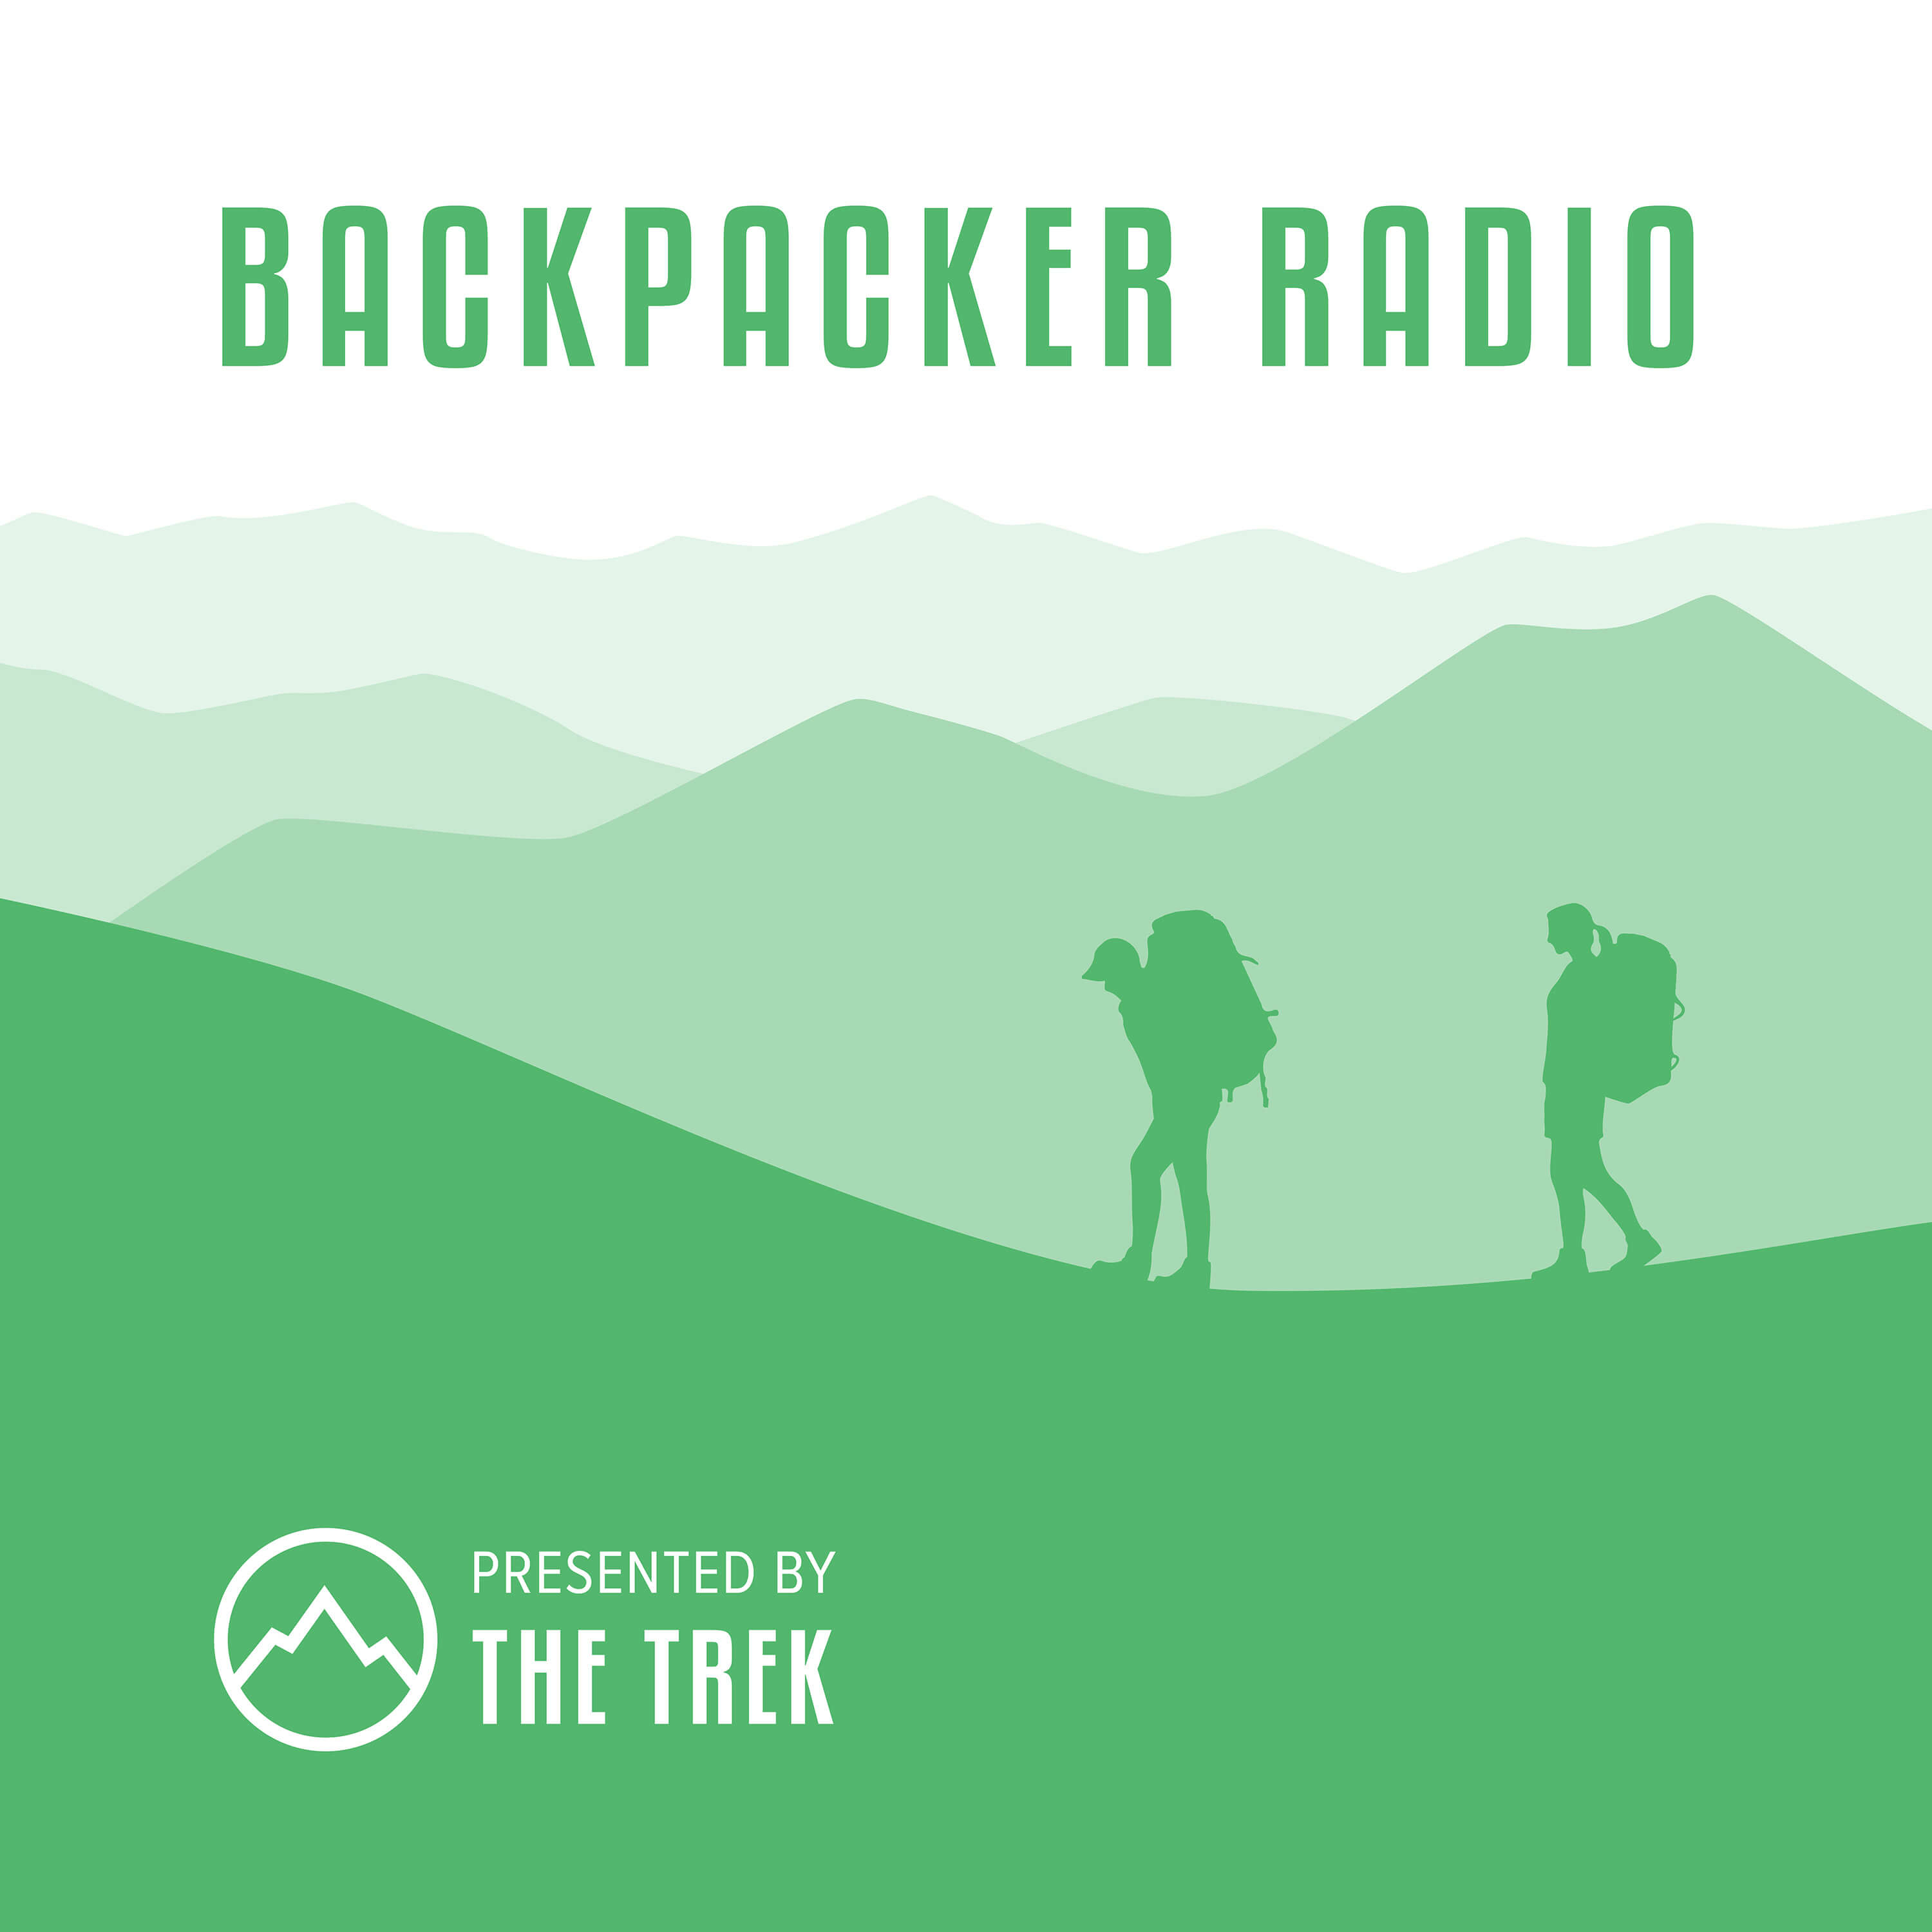 Backpacker Radio: A Podcast that Inspires You to Answer Nature’s Call